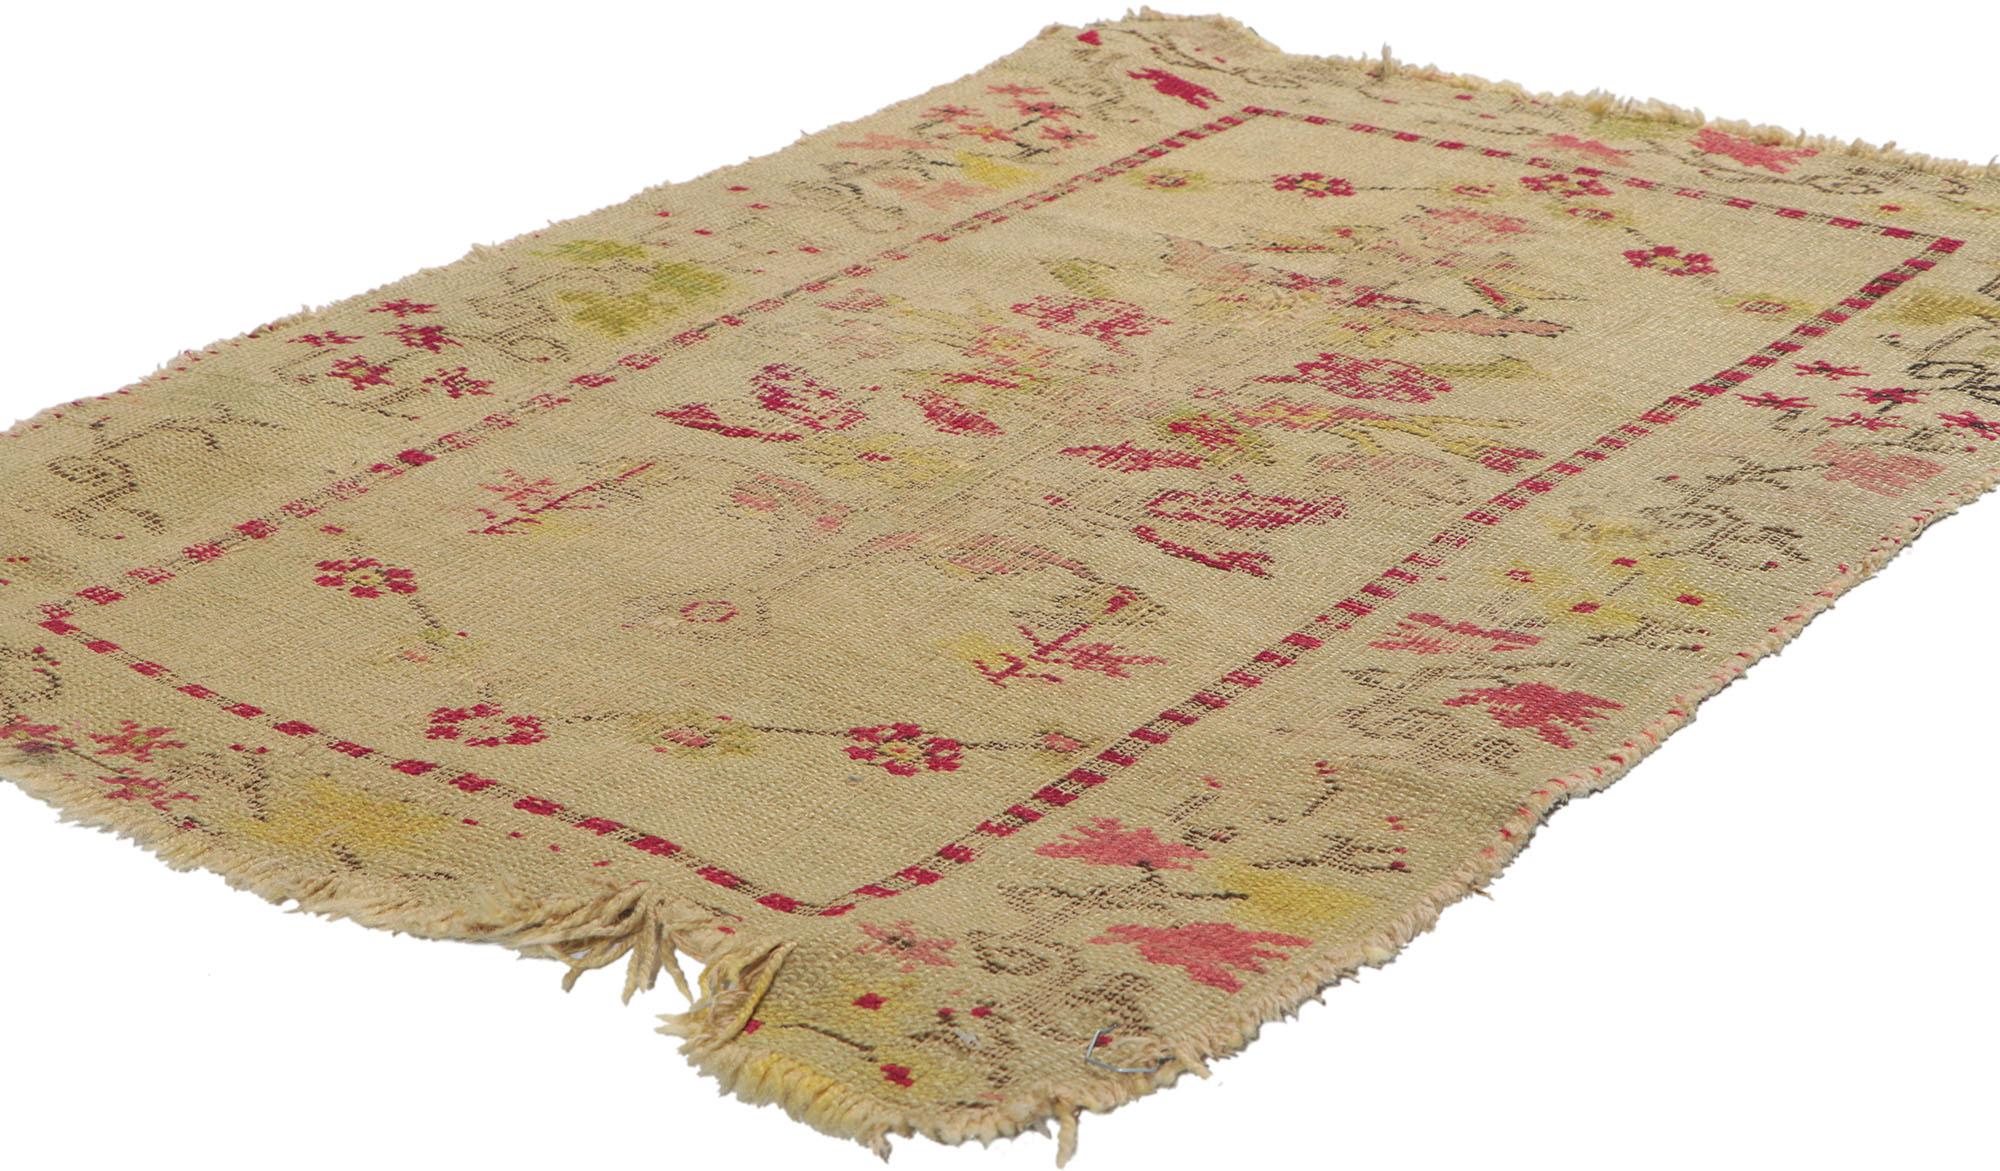 71041, distressed antique Turkish Oushak Accent rug. This perfectly worn-in distressed antique Turkish Oushak accent rug features stylized floral motifs on a neutral color foundation. A simple red guard band frames the center field enclosing the